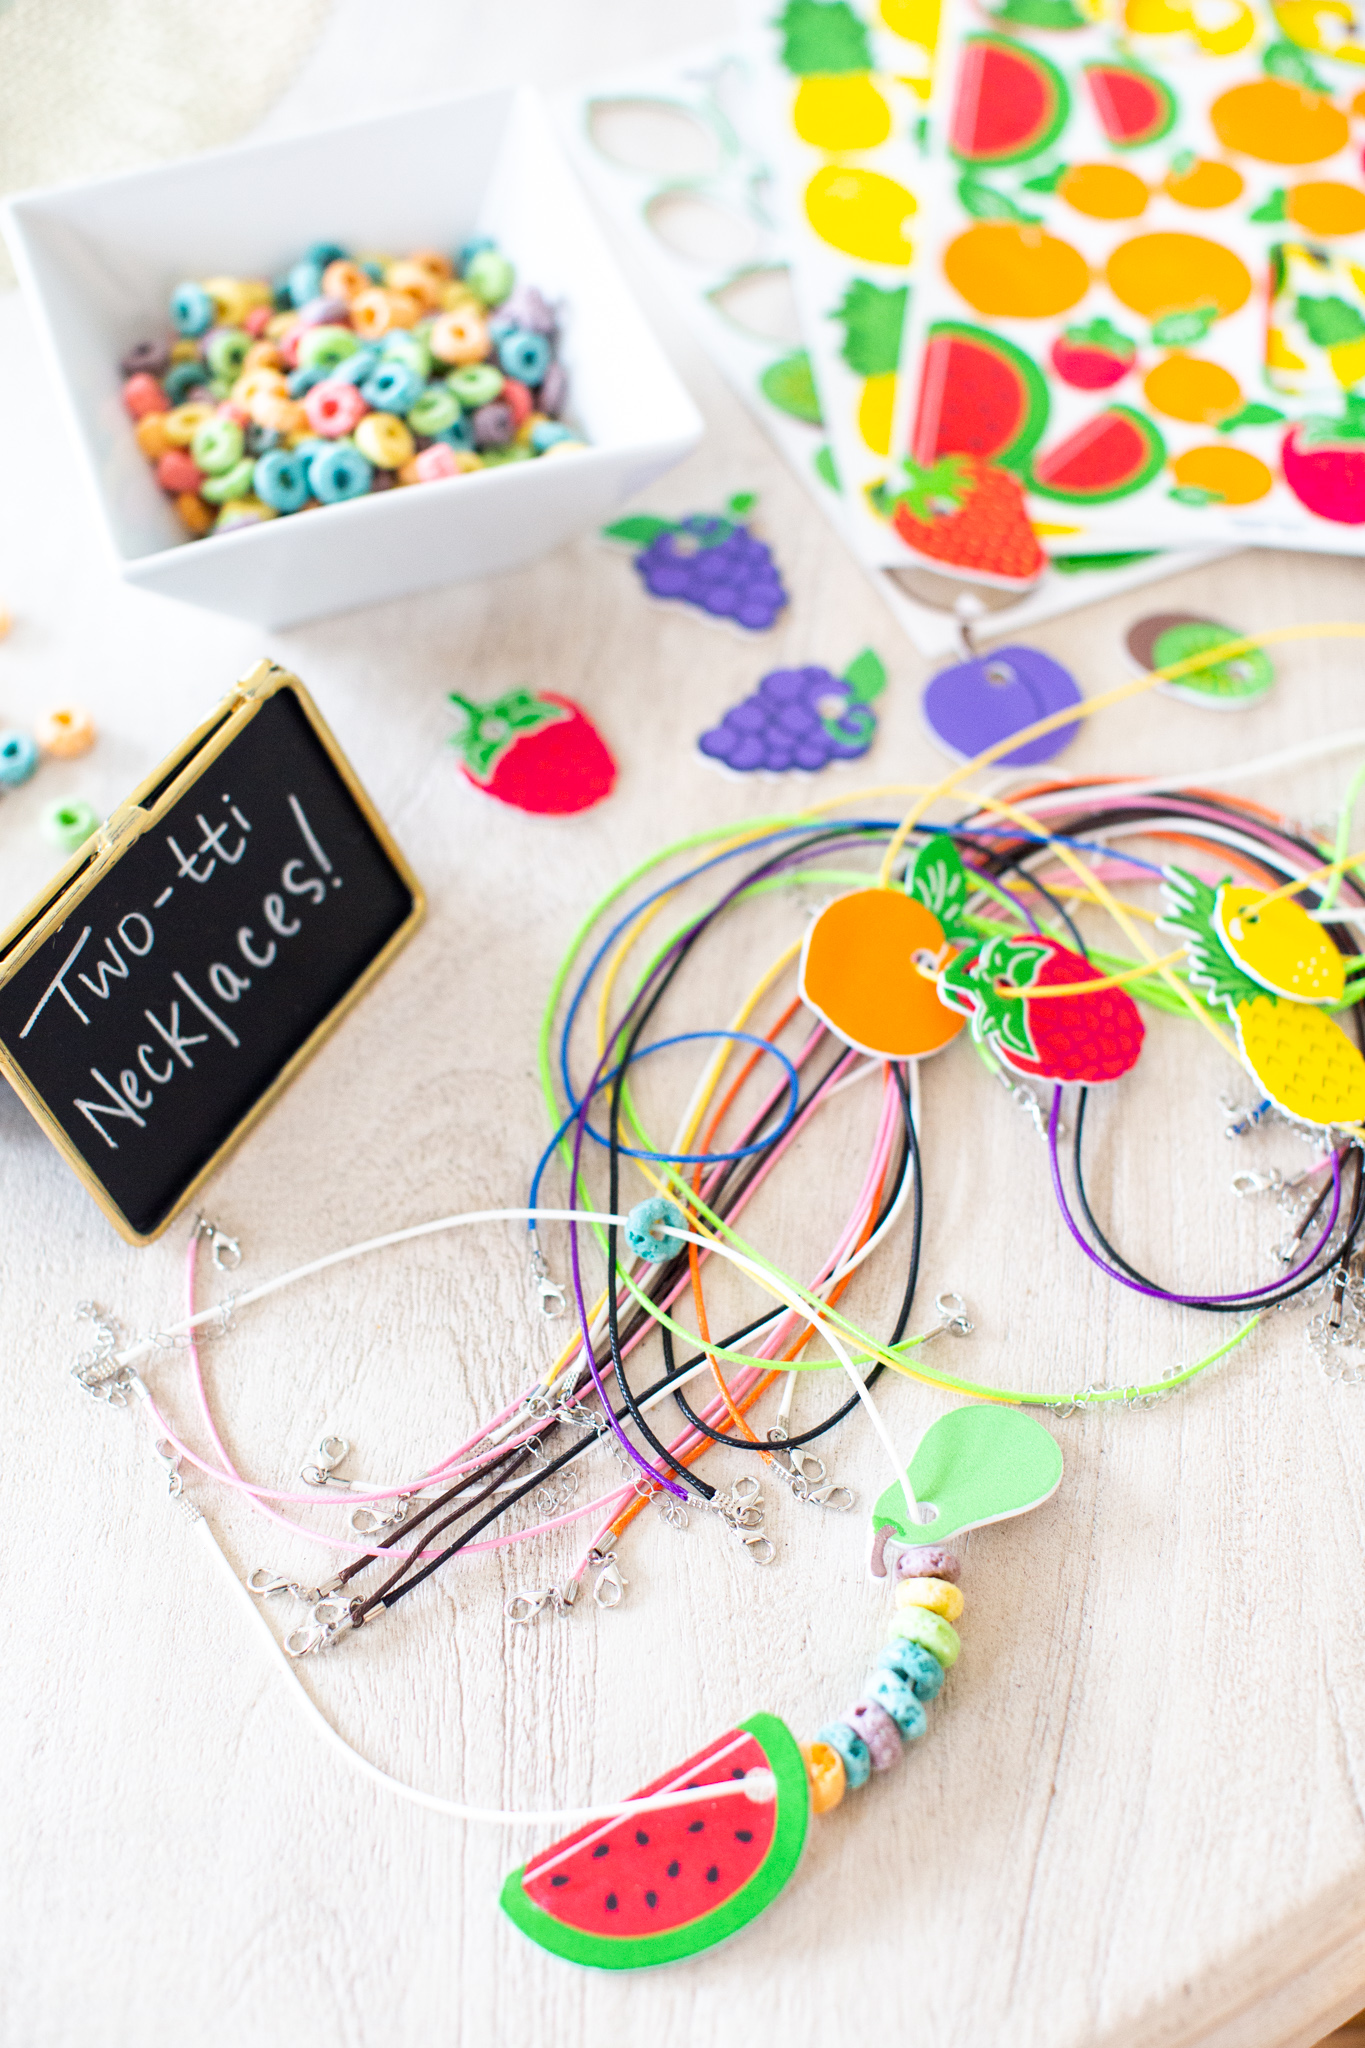 2nd Birthday Party Ideas by popular Ohio lifestyle blog, Coffee Beans and Bobby Pins: image of necklaces decorated with fruit loops and die cut pieces of paper fruit. 